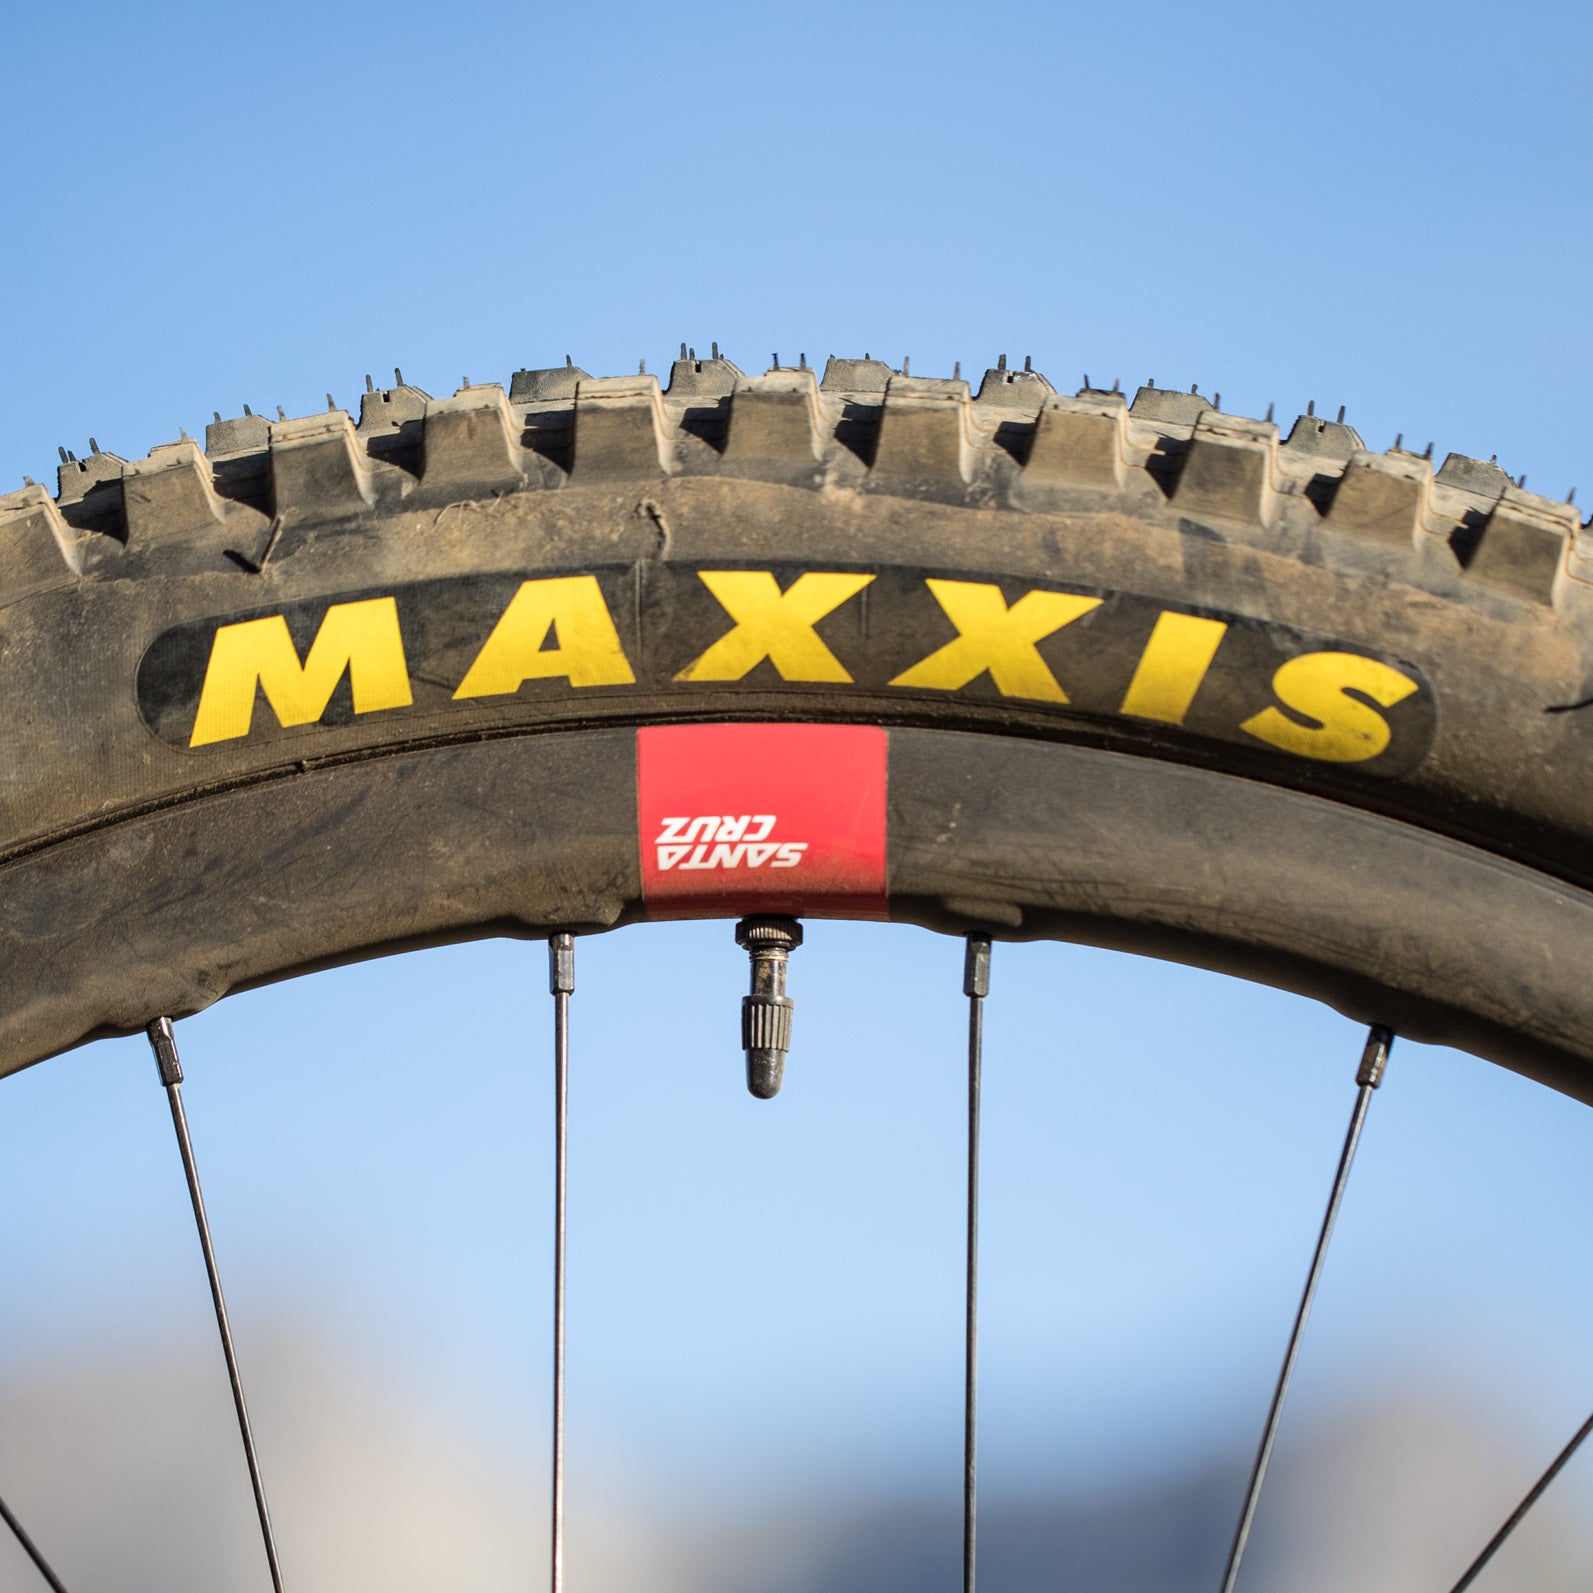 WHATEVER YOU RIDE: SOUTH AFRICA HAS A MAXXIS TYRE FOR YOU